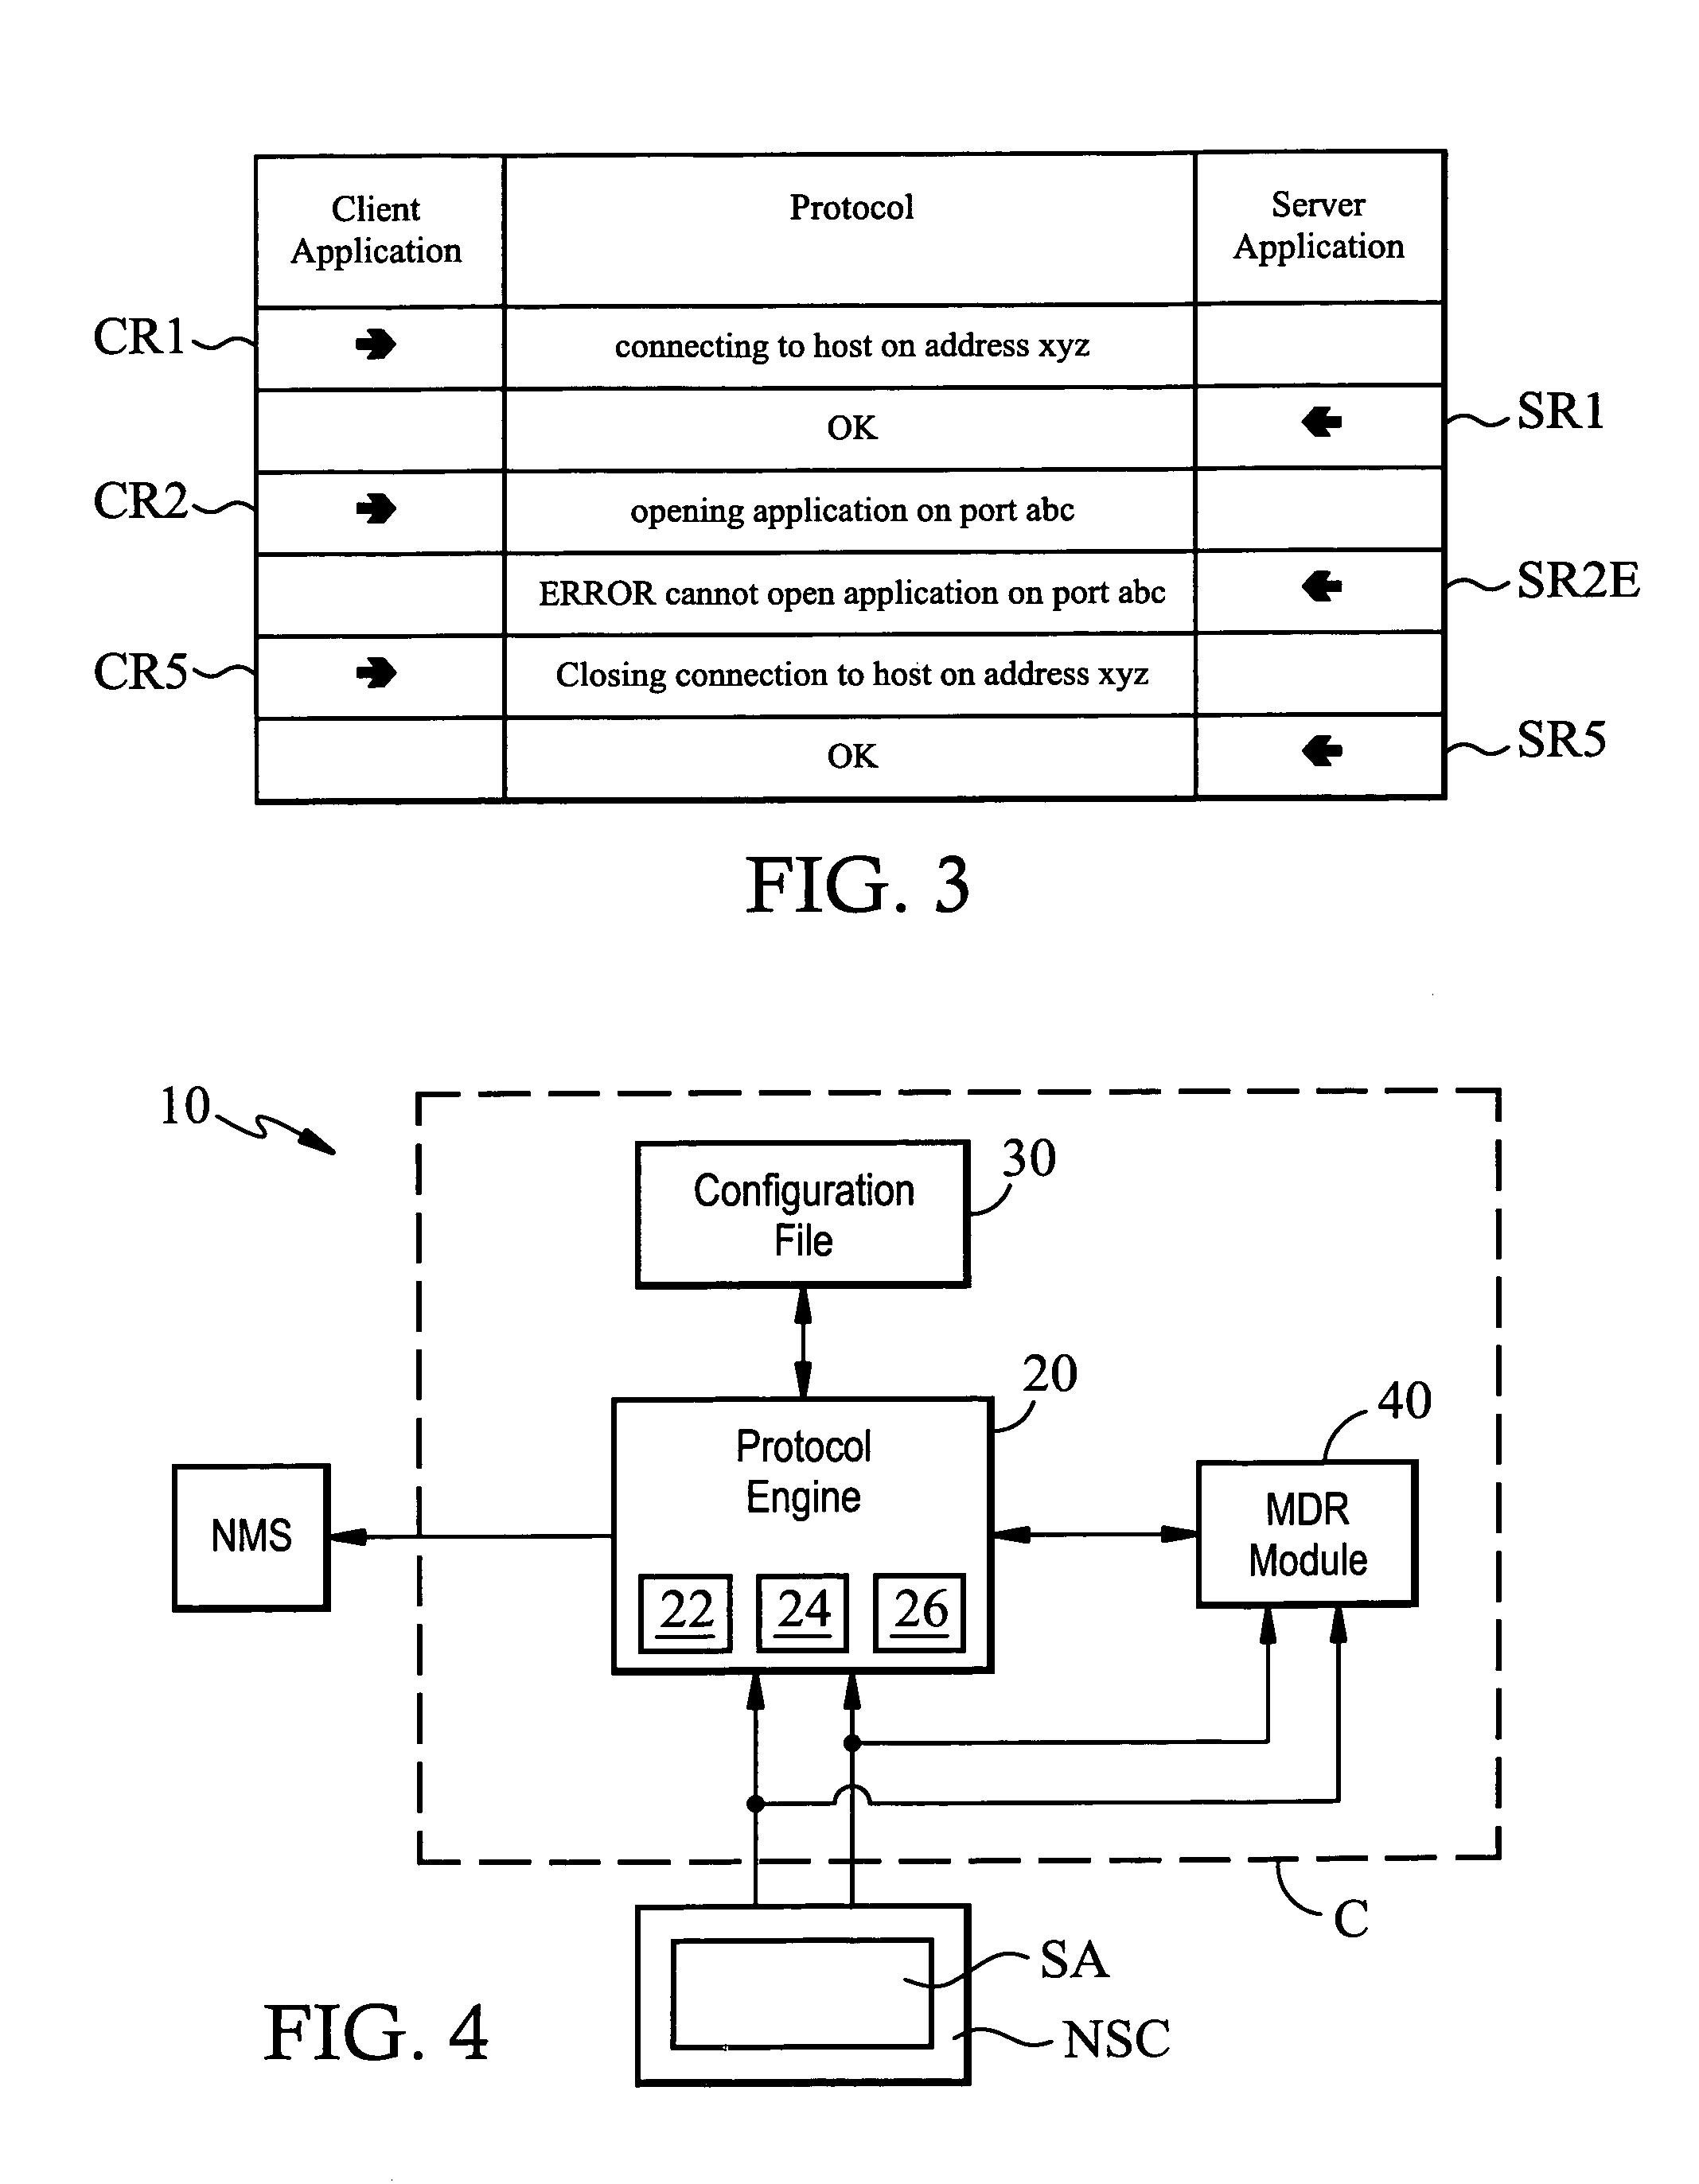 Protocol sleuthing system and method for load-testing a network server